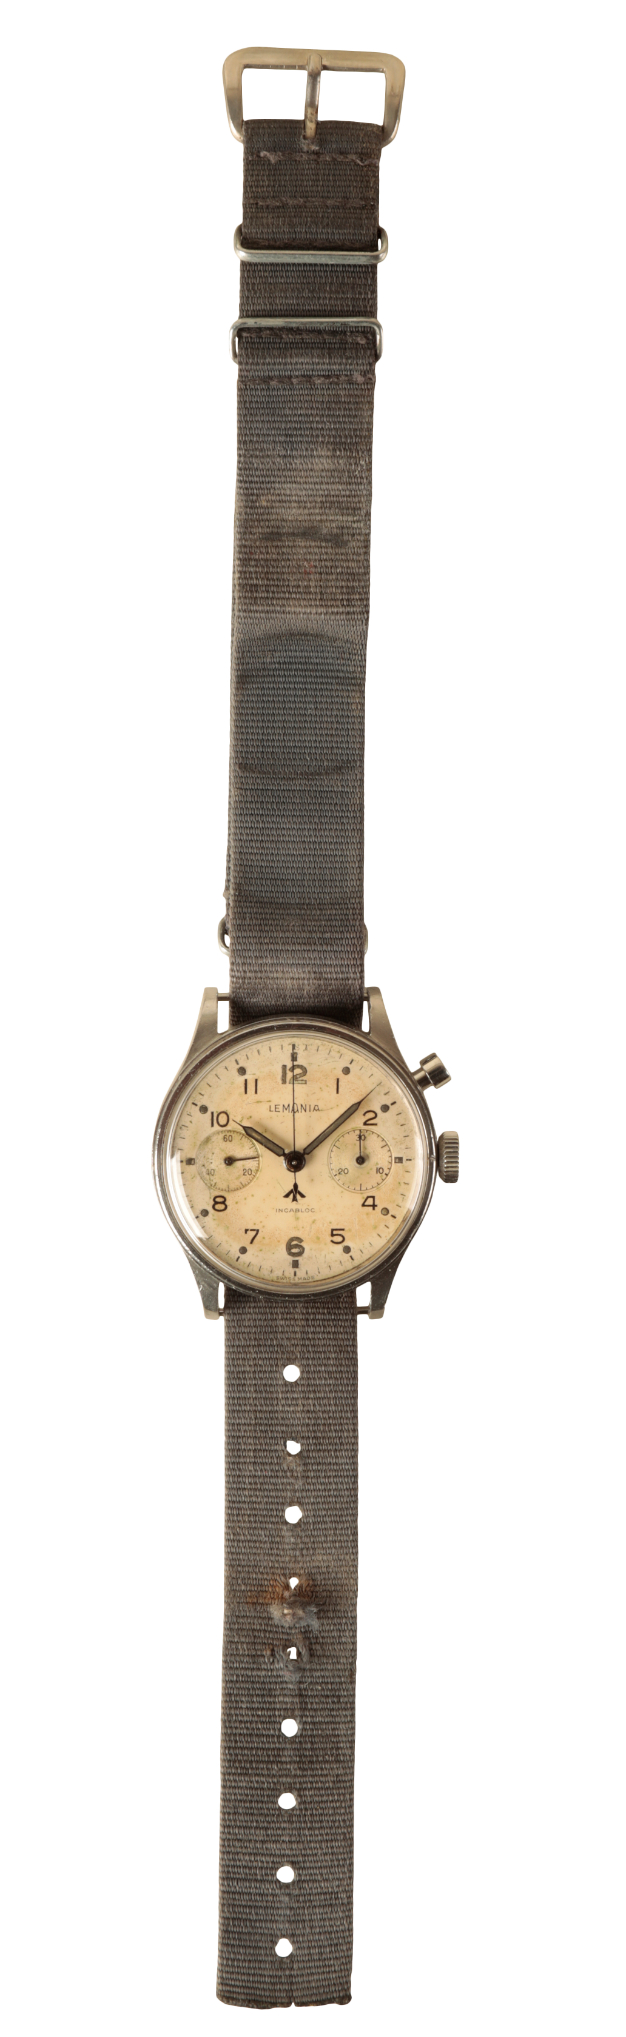 LEMANIA: A BRITISH ROYAL AIR FORCE GENTLEMAN'S CHRONOGRAPH STAINLESS STEEL WRISTWATCH - Image 2 of 6